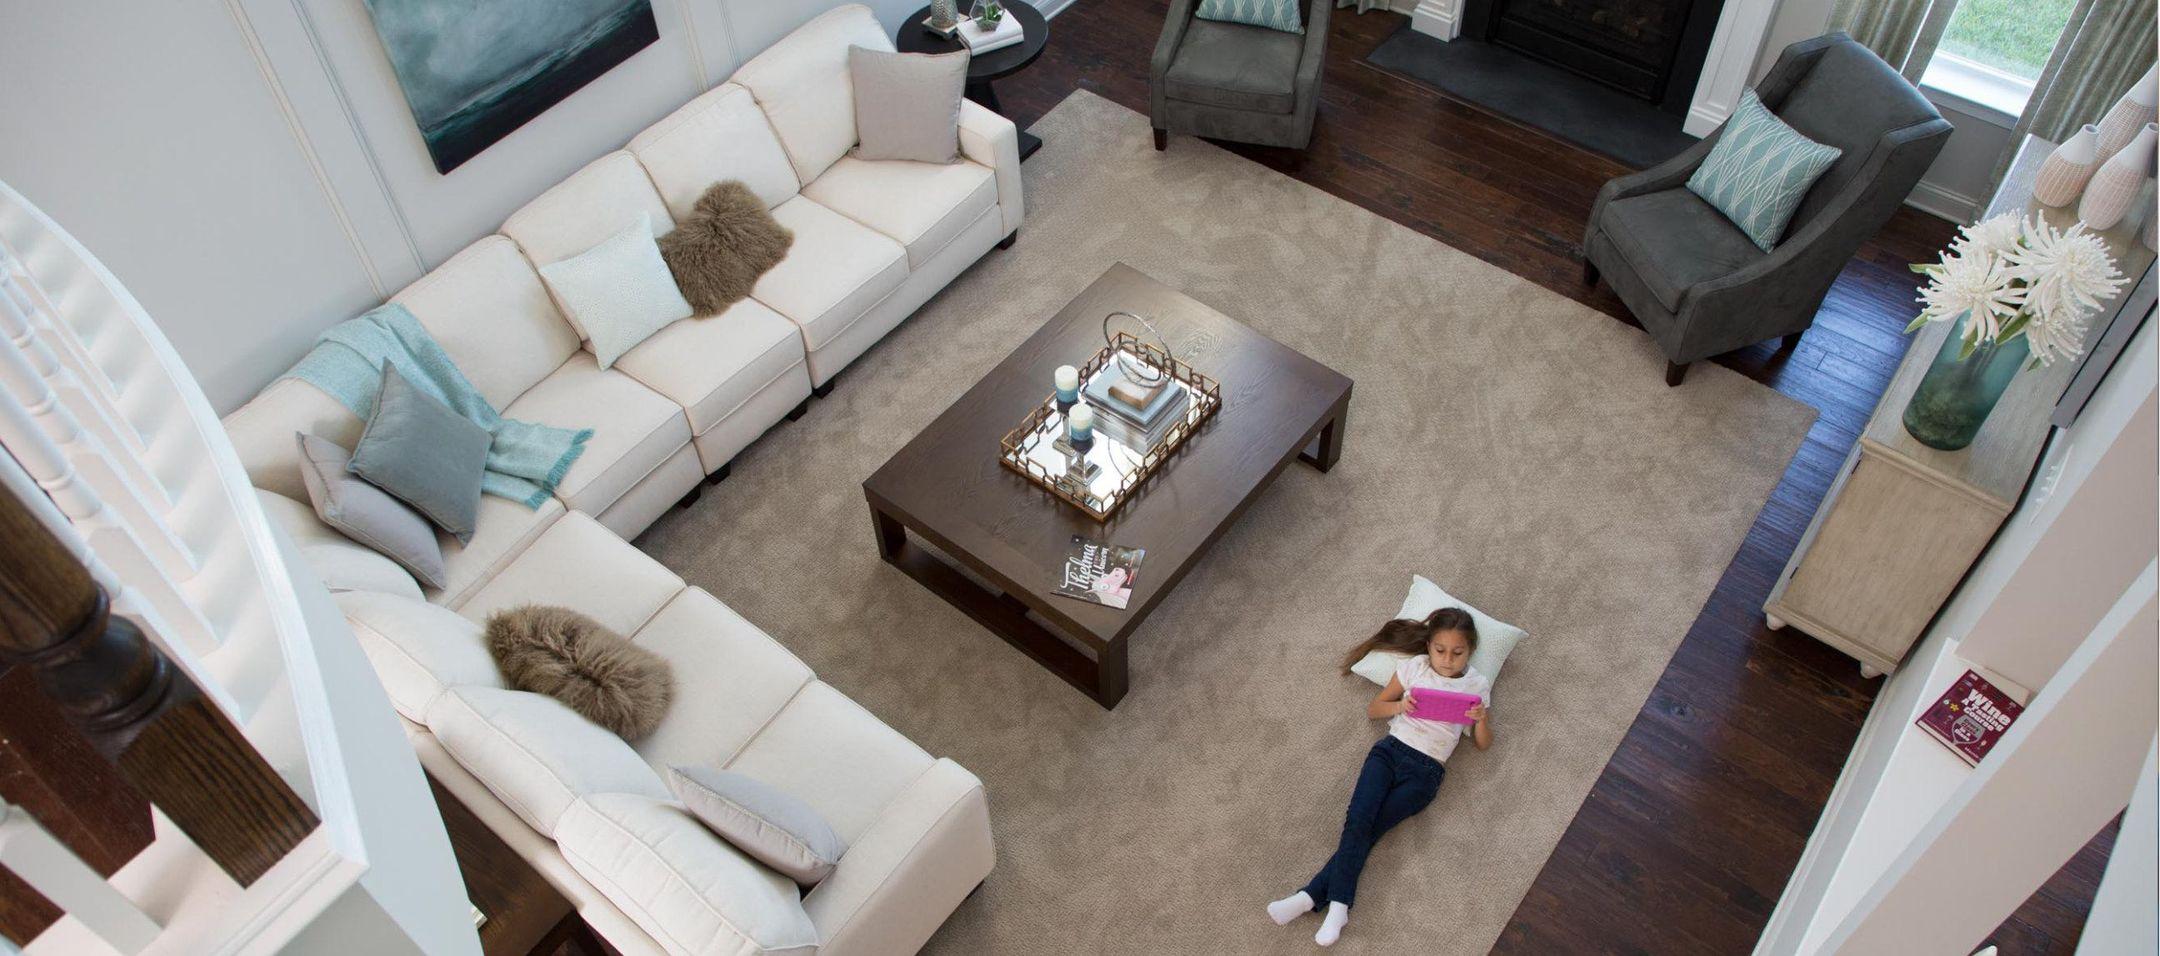 View of a living room from above with a young girl laying on the rug reading a book with her head on a pillow.